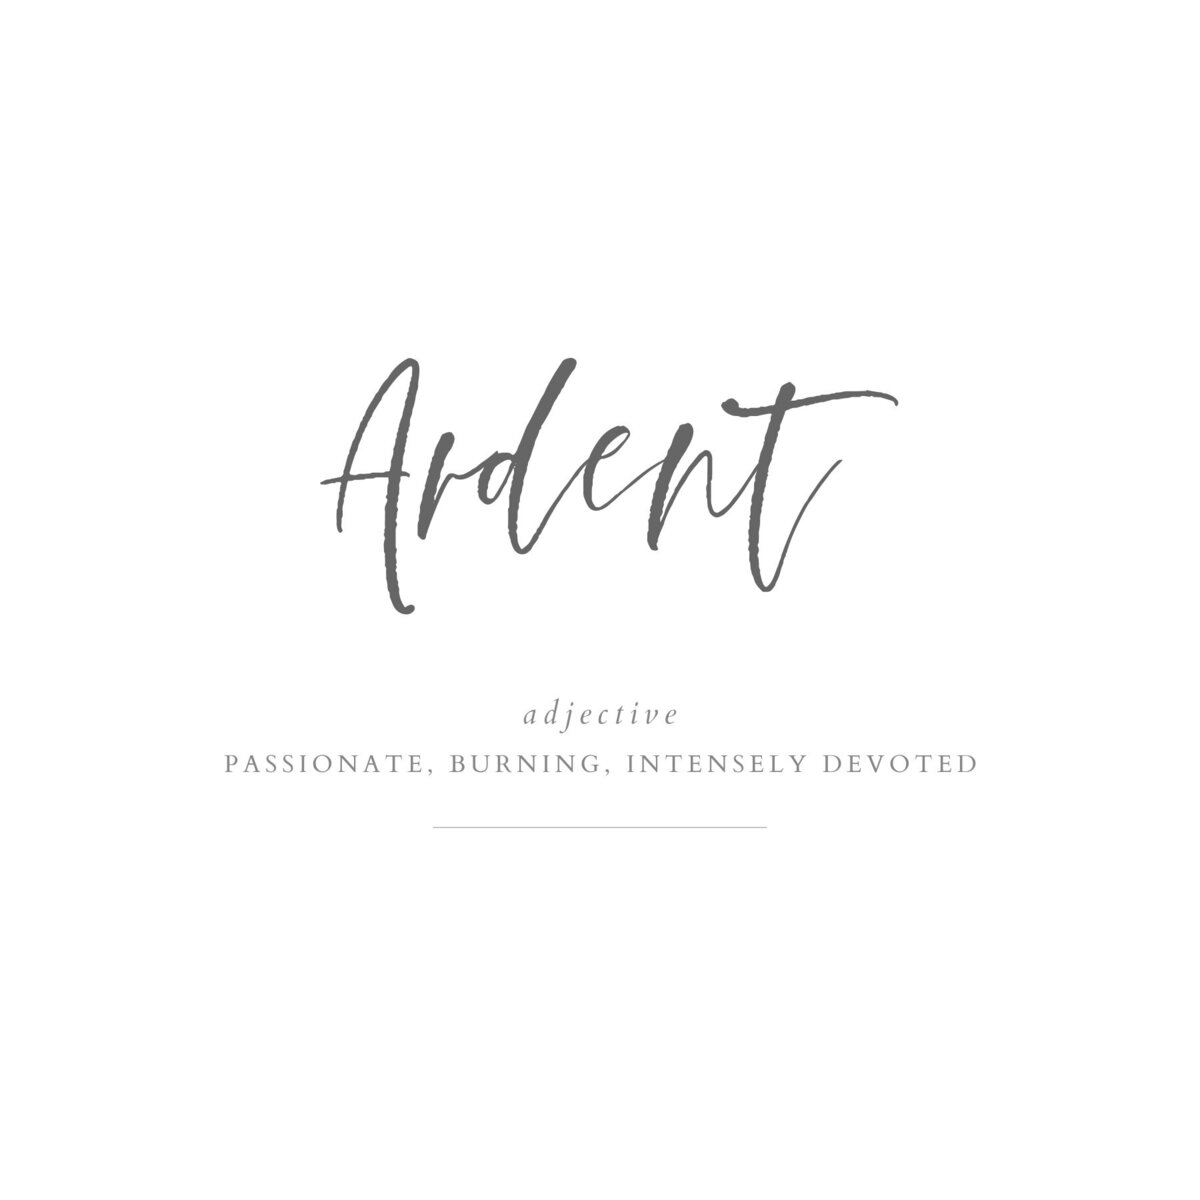 Ardent_Title Page